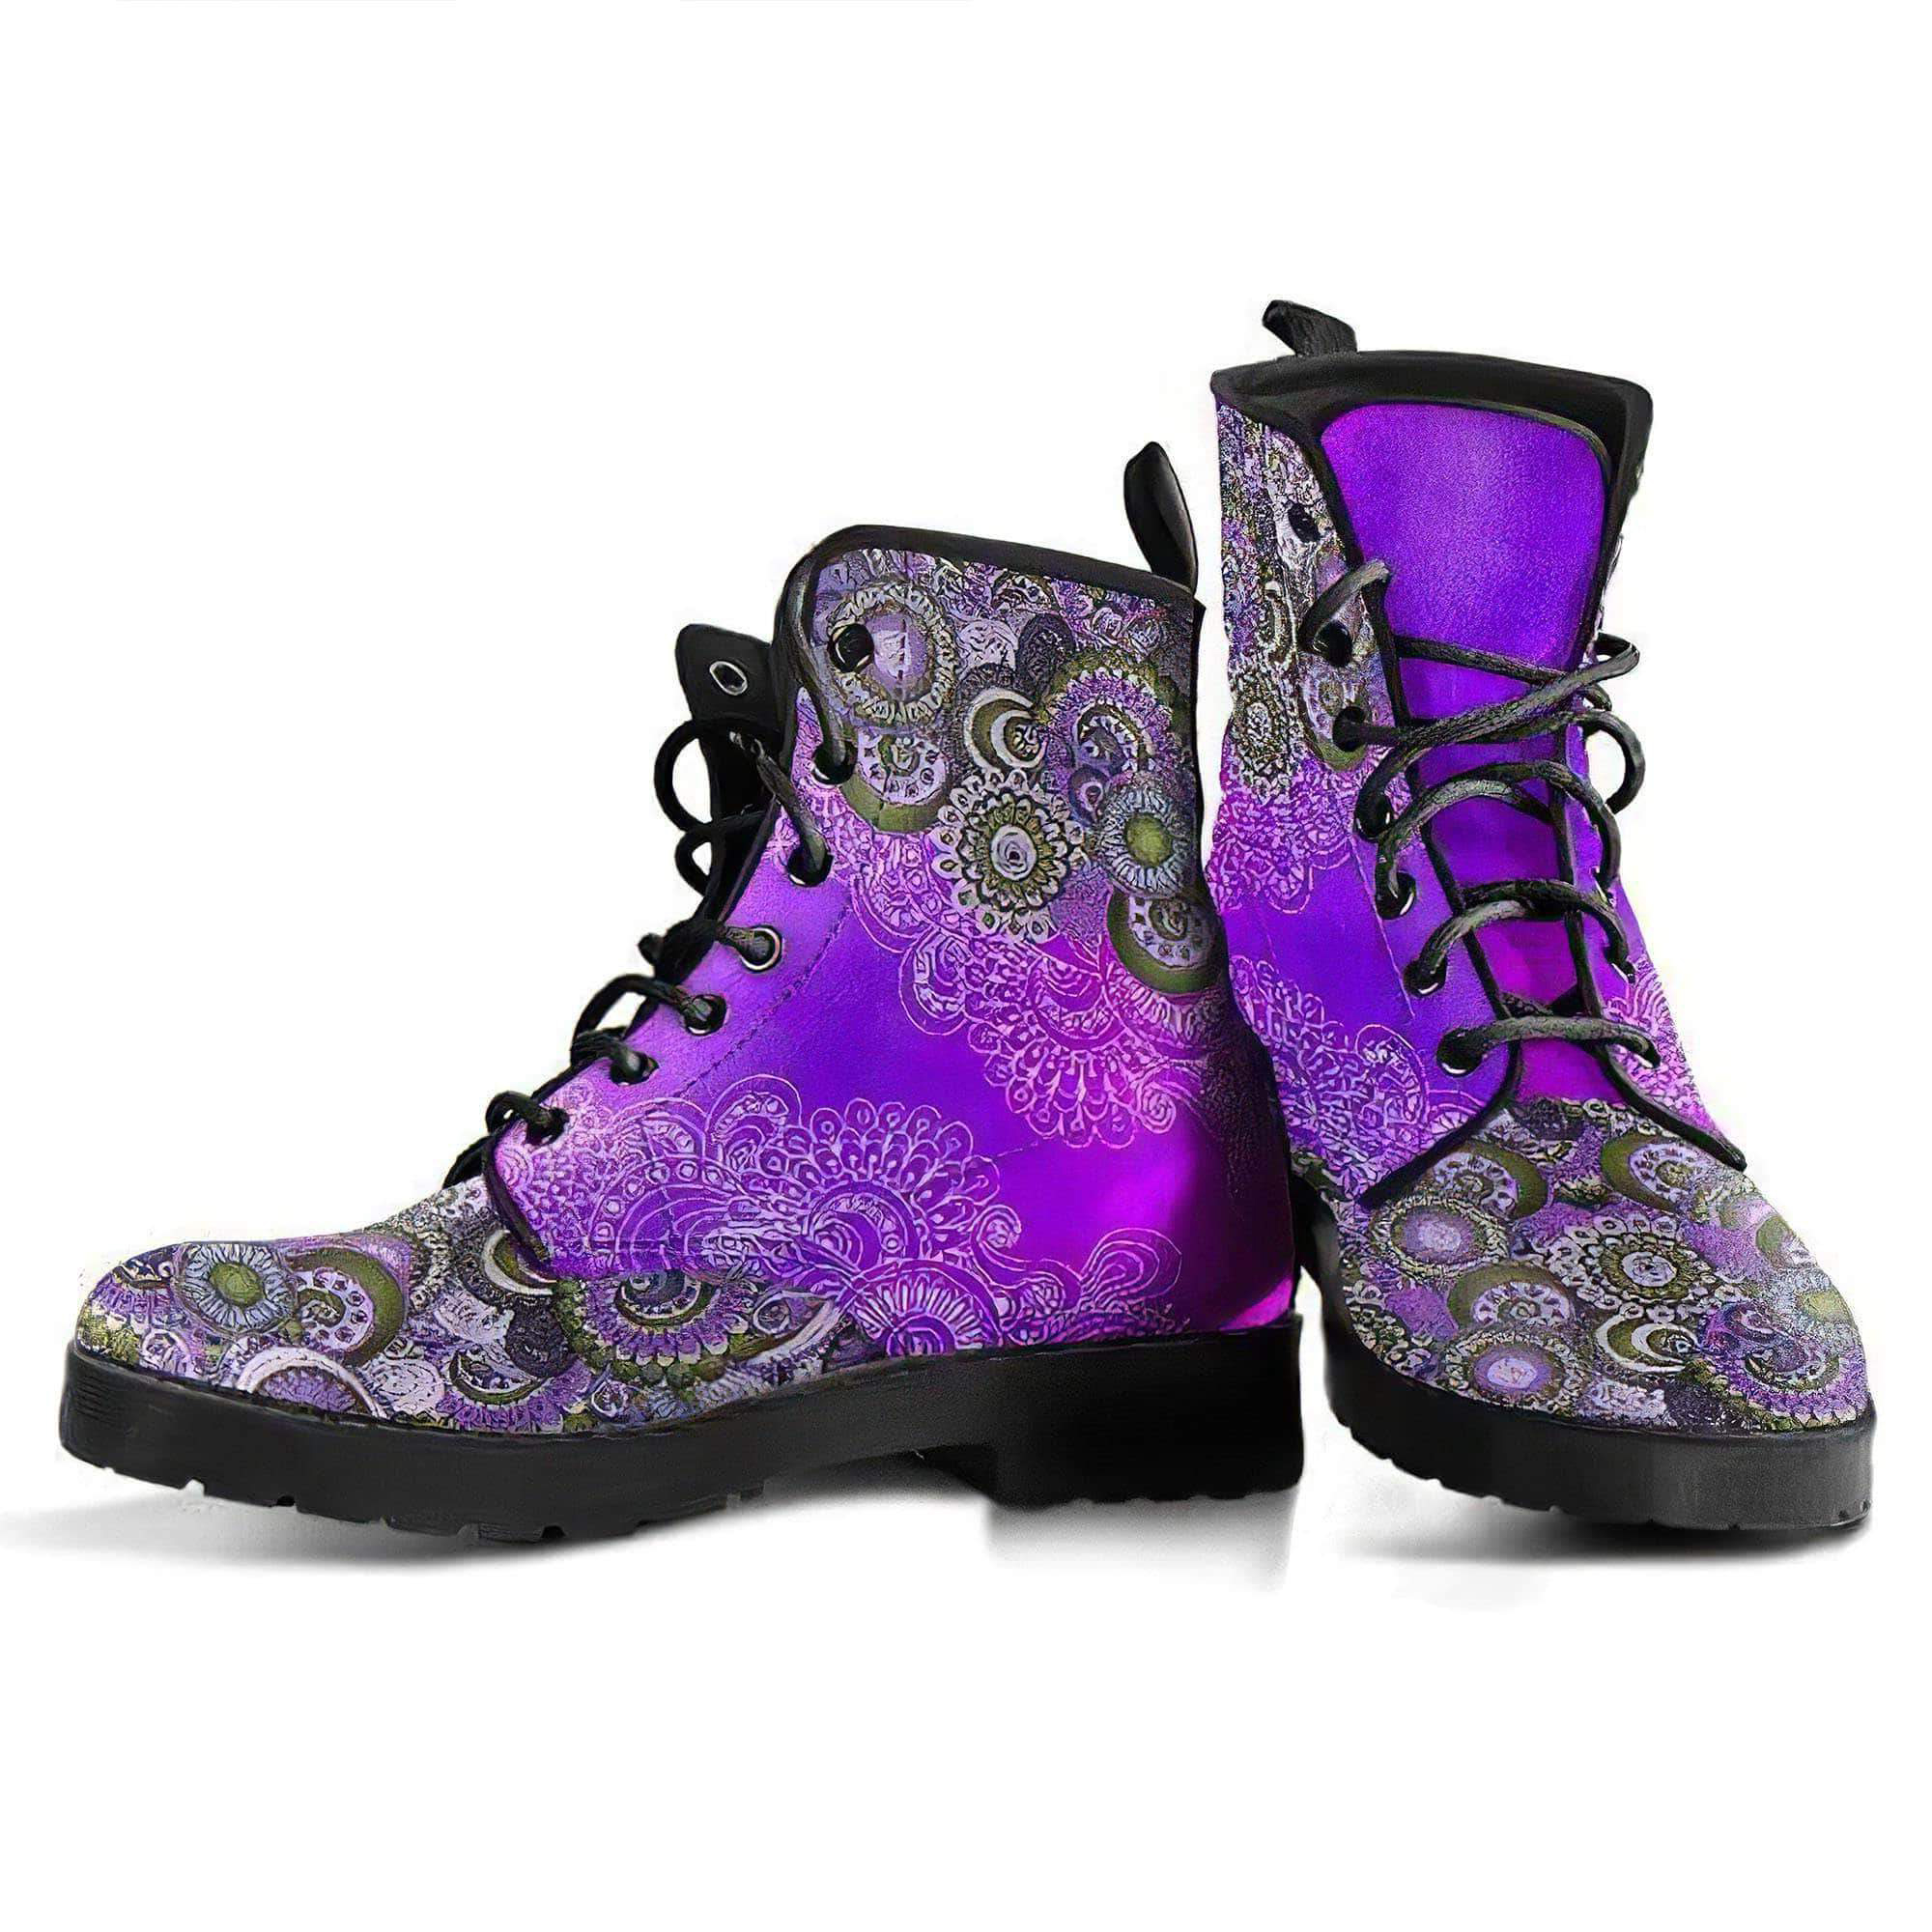 purple-paisley-mandala-handcrafted-boots-women-s-leather-boots-12054251634749.jpg